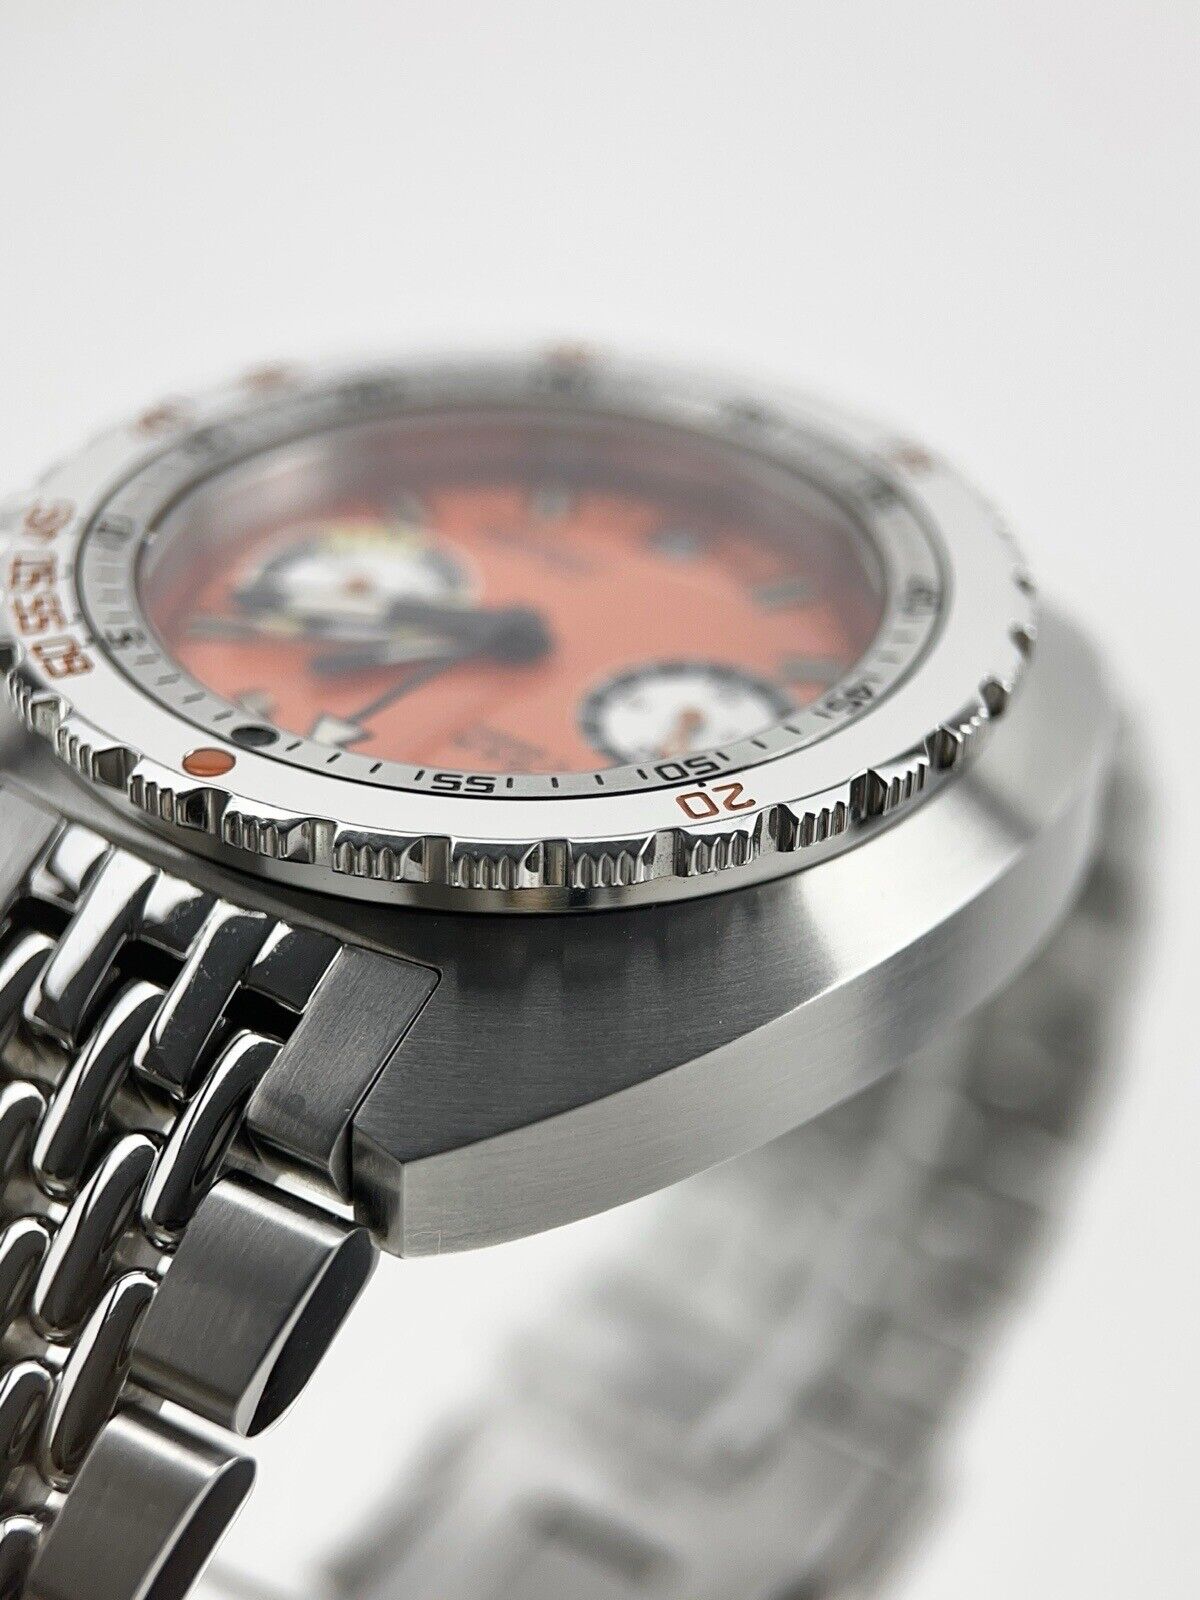 Doxa Sub 43mm Automatic Orange Dial Limited Edition Sub 200 T-Graph Box & Papers